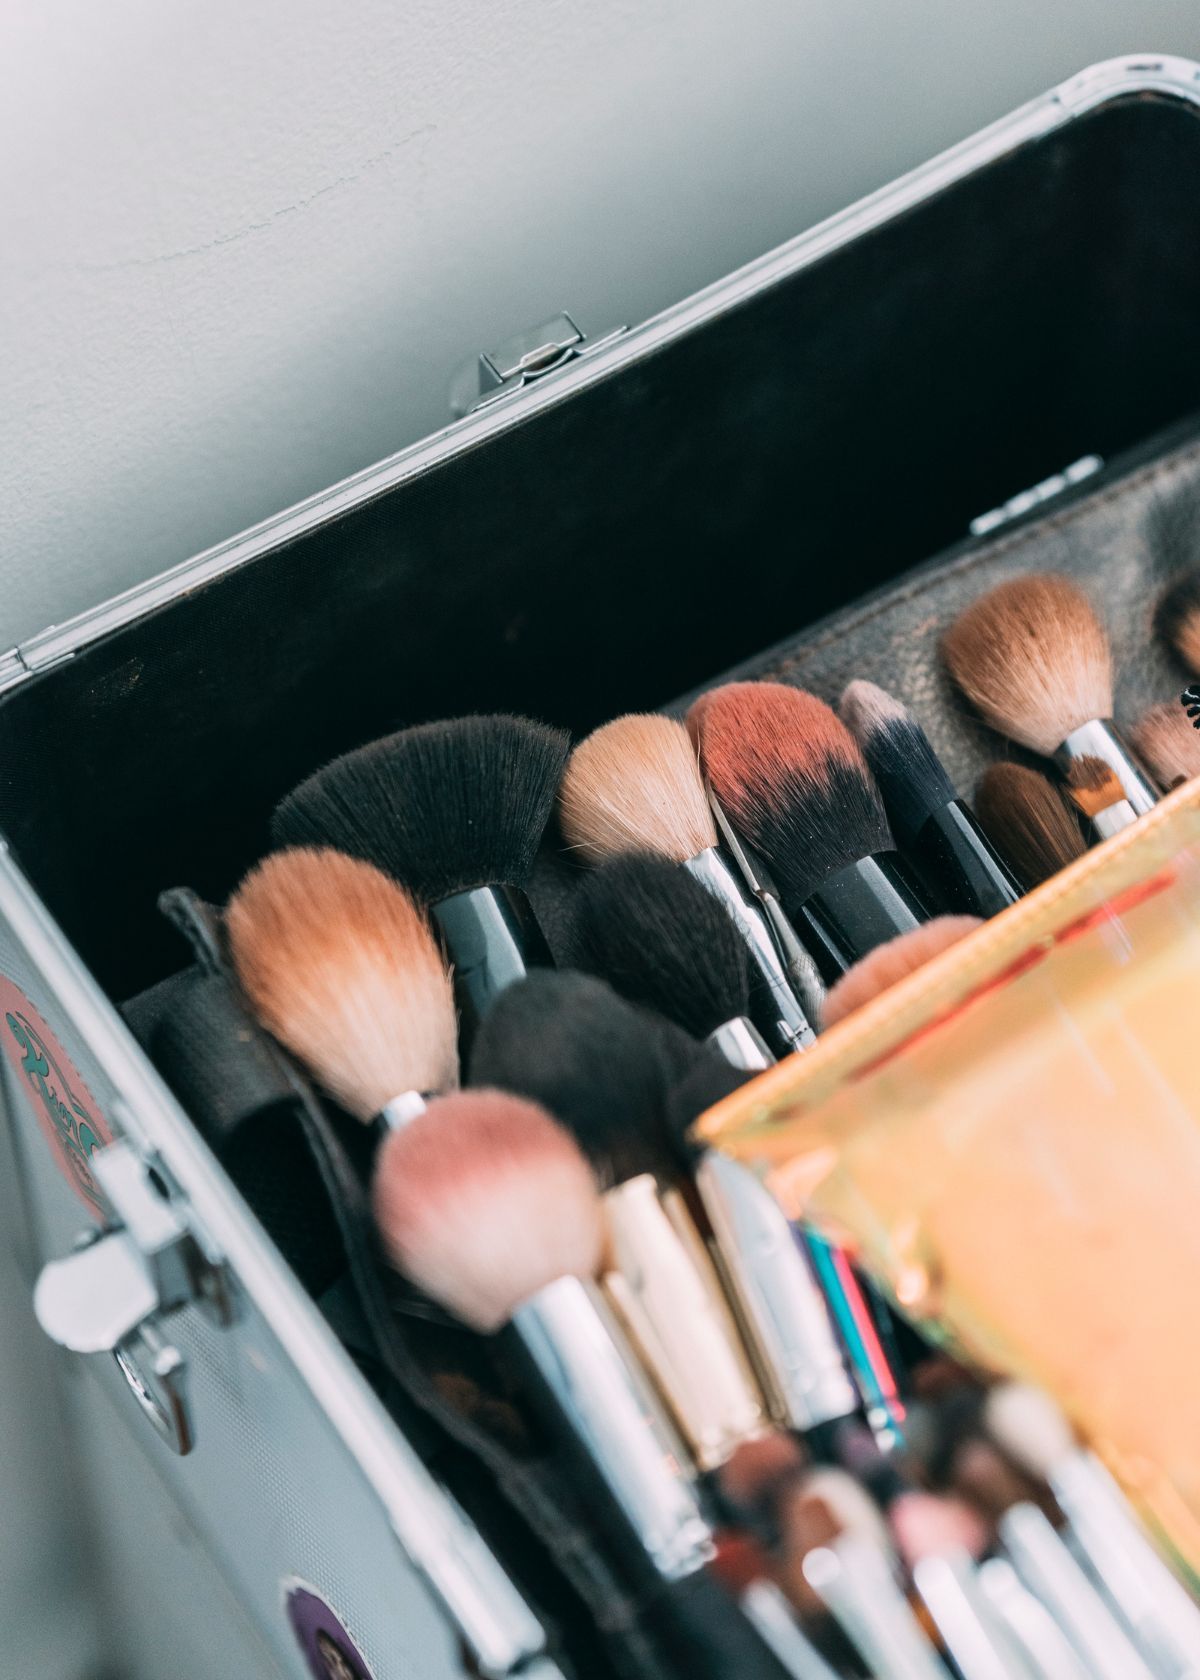 Professional Makeup Storage: The Best Products for Your Collection